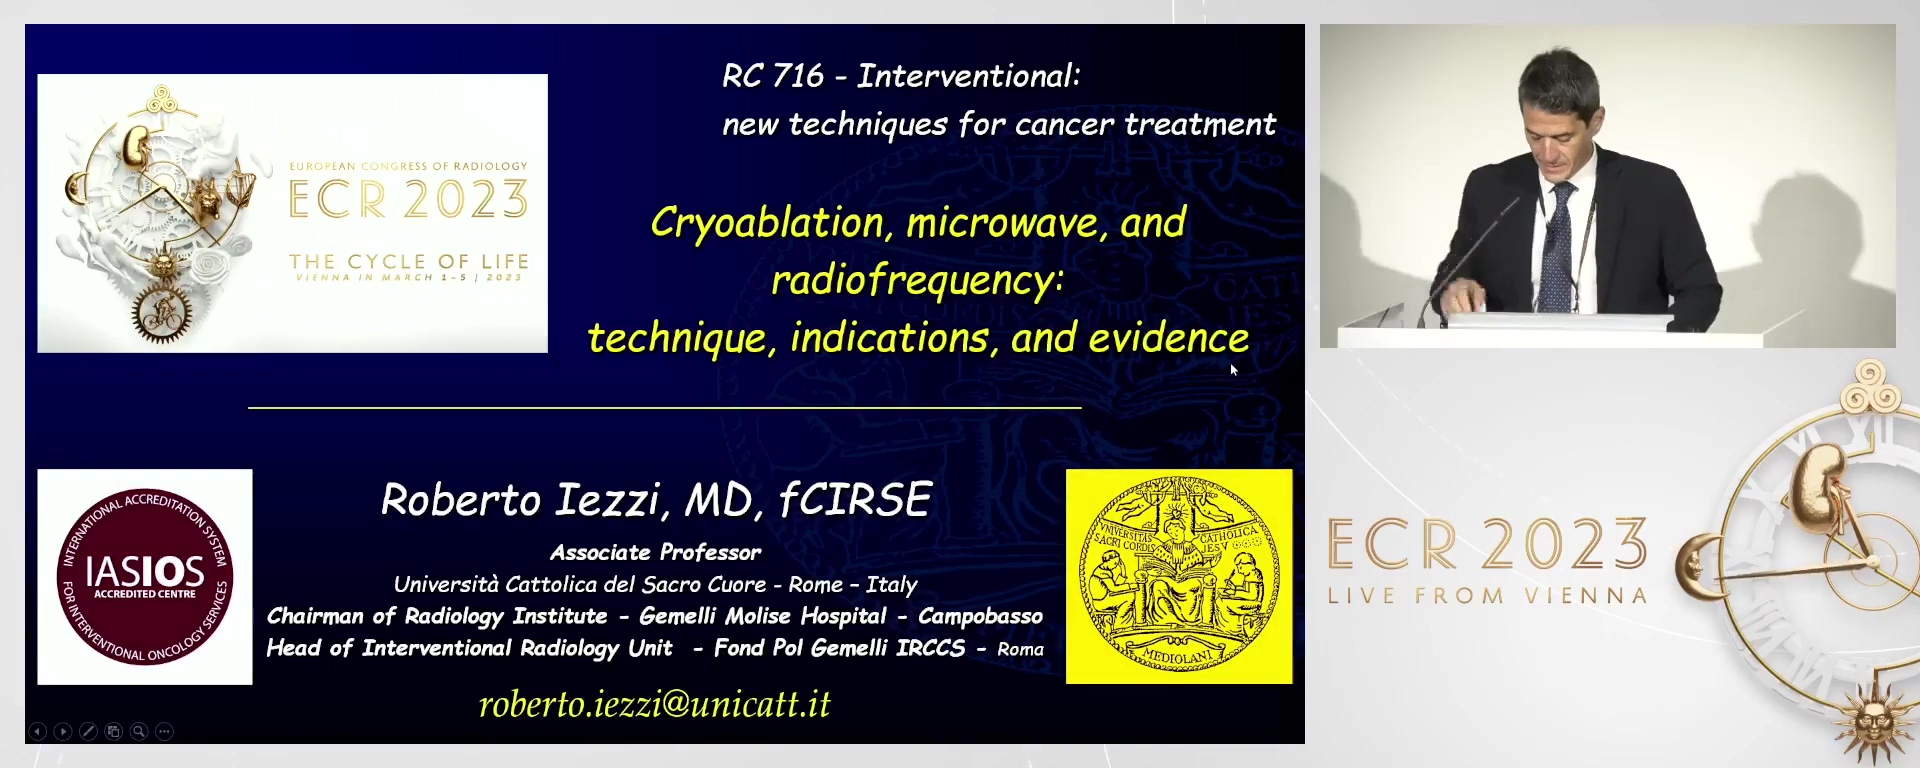 Cryoablation, microwave, and radiofrequency: technique, indications, and evidence